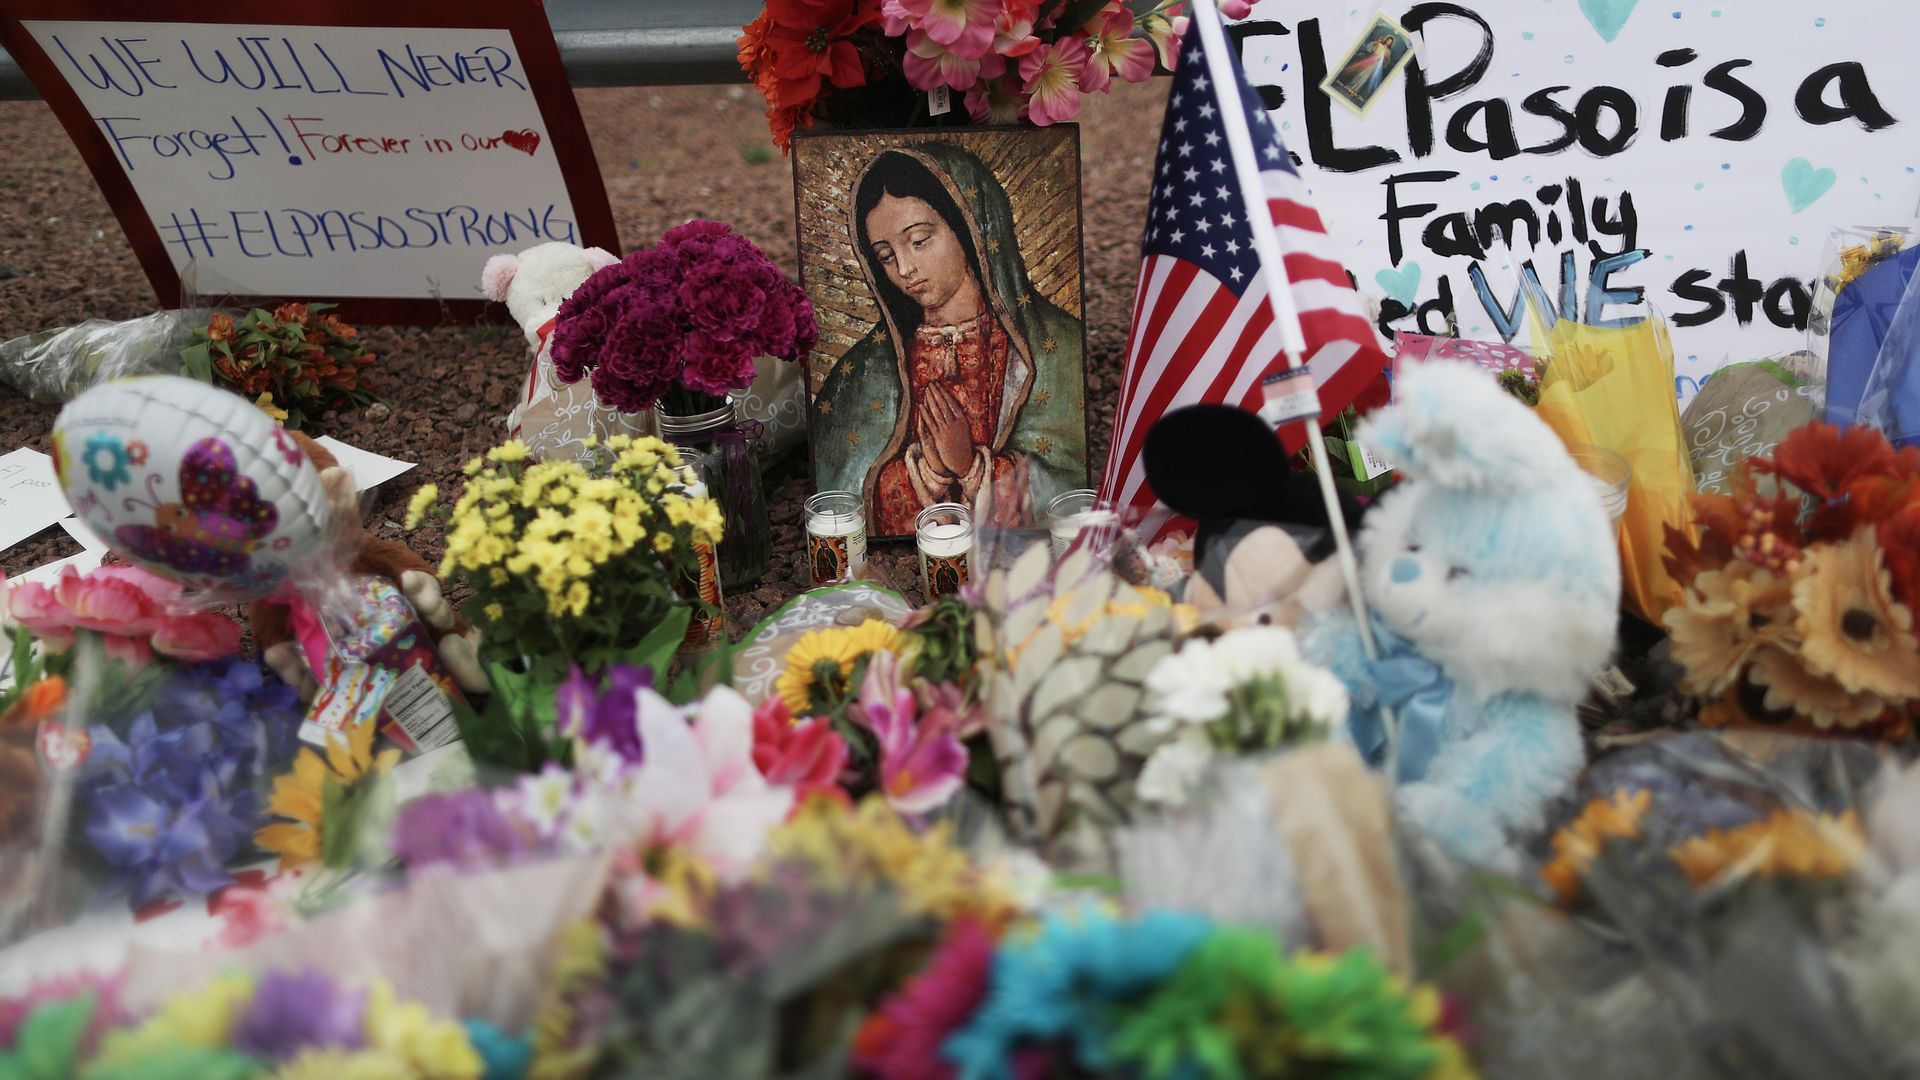  Flowers and mementos are seen at a makeshift memorial outside Walmart, near the scene of a mass shooting which left at least 20 people dead, on August 4, 2019 in El Paso